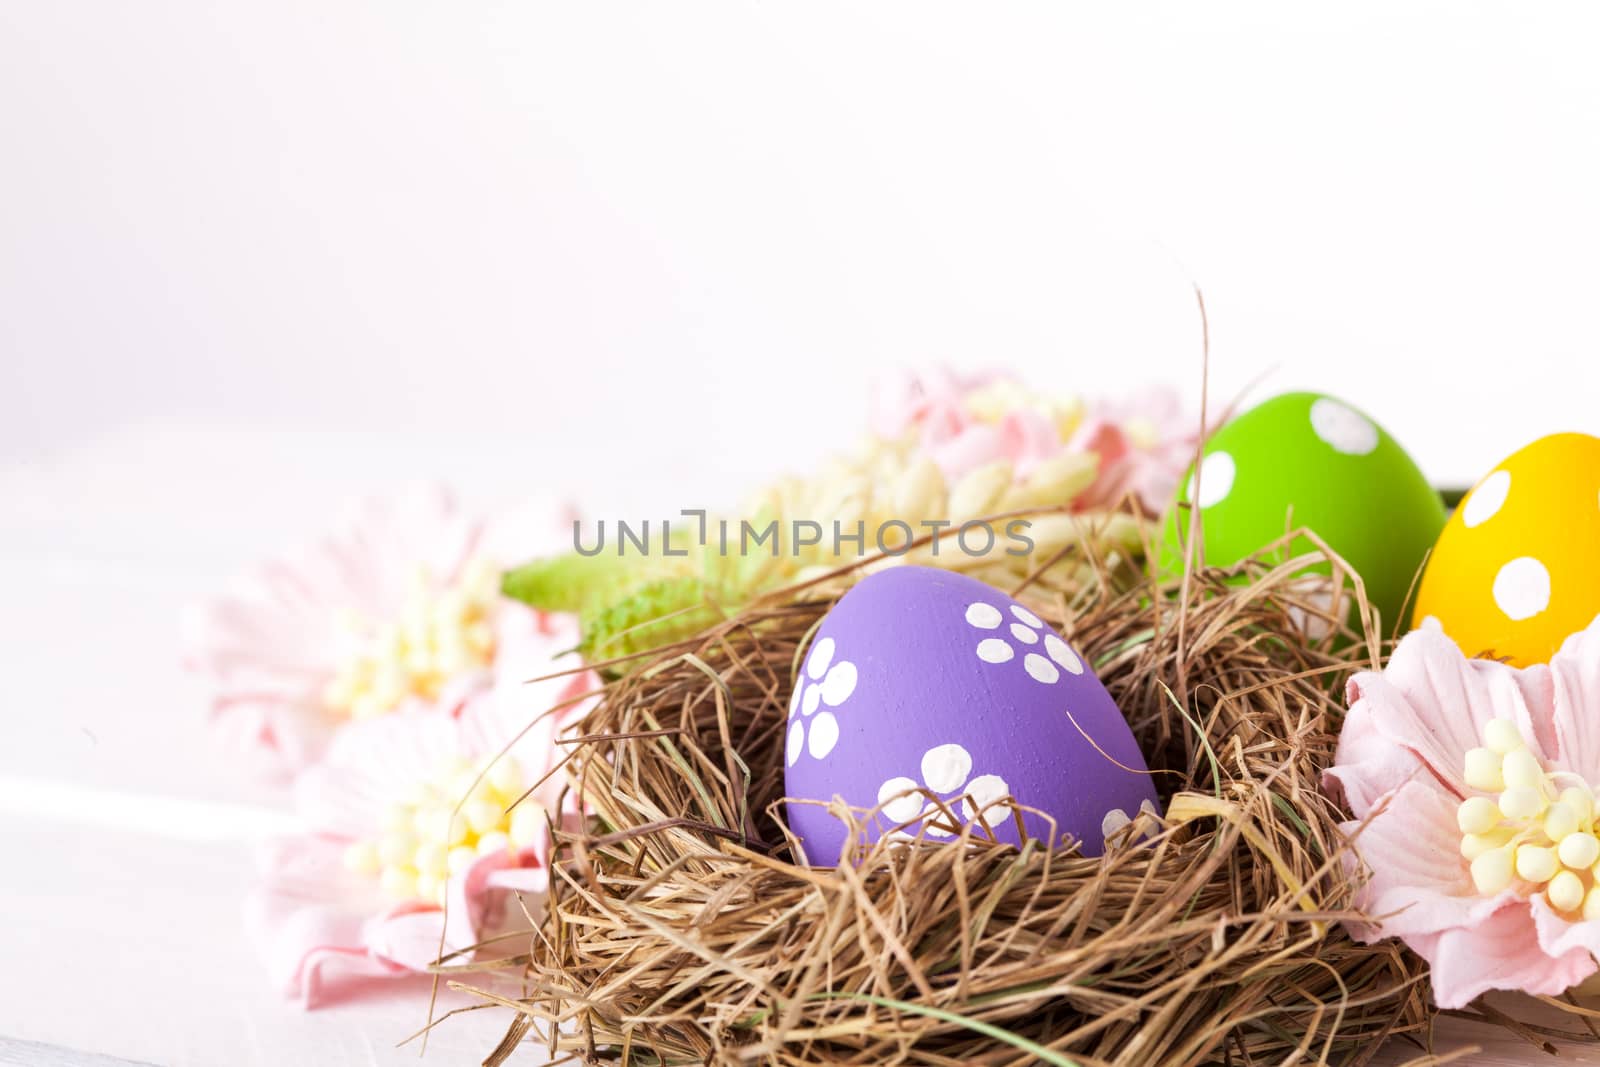 Colorful easter eggs with white points by fotomaximum